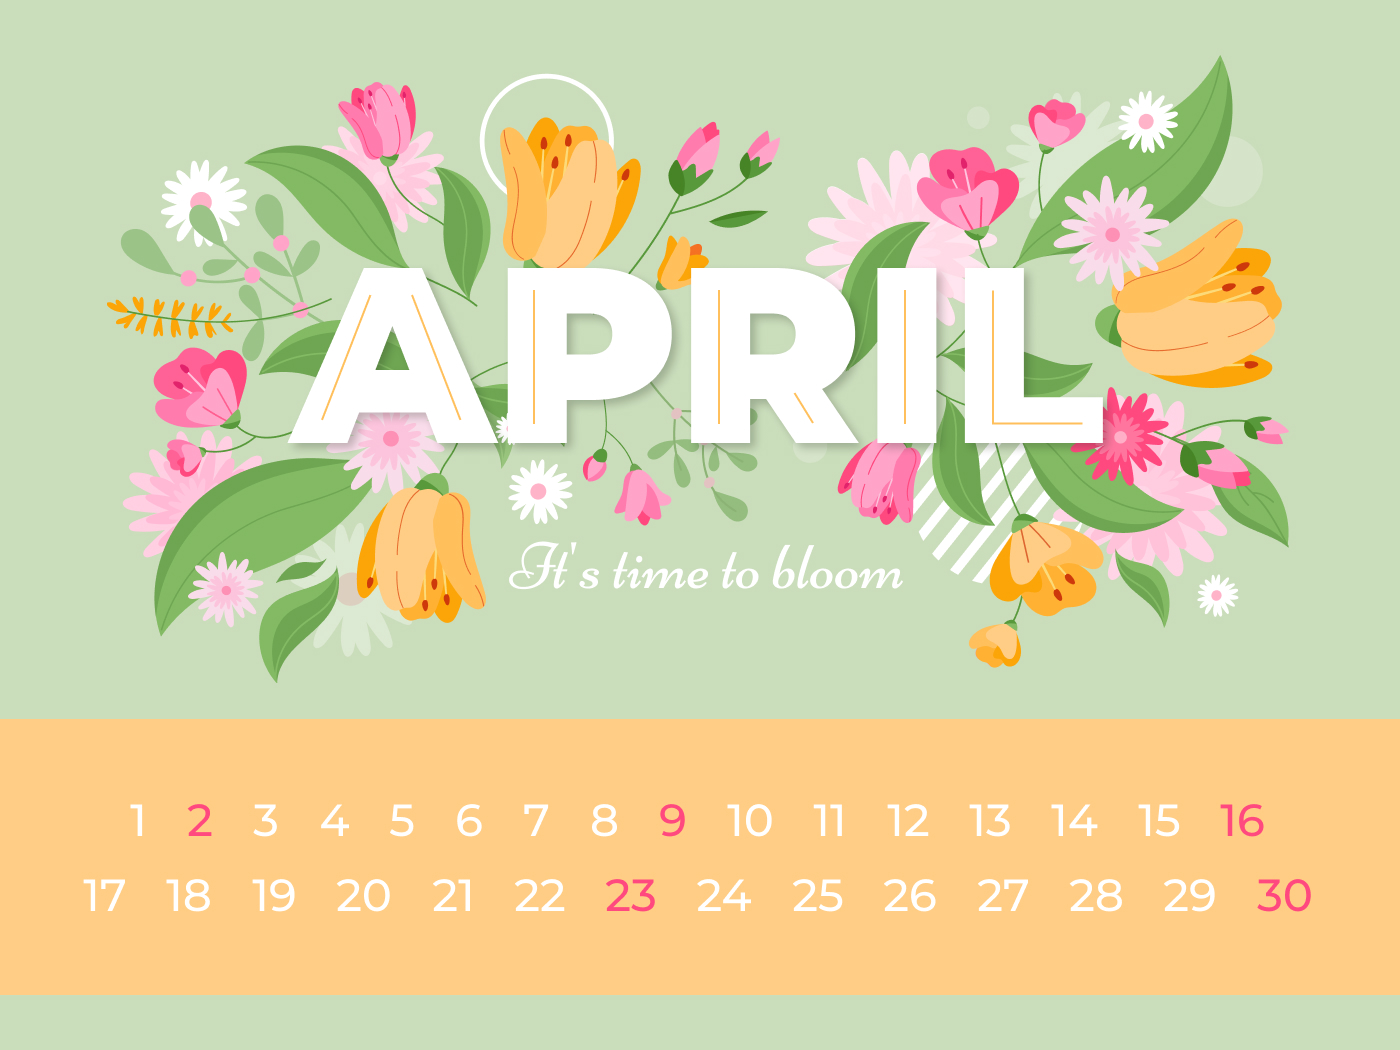 Calendar with flowers on it and the date of the month.